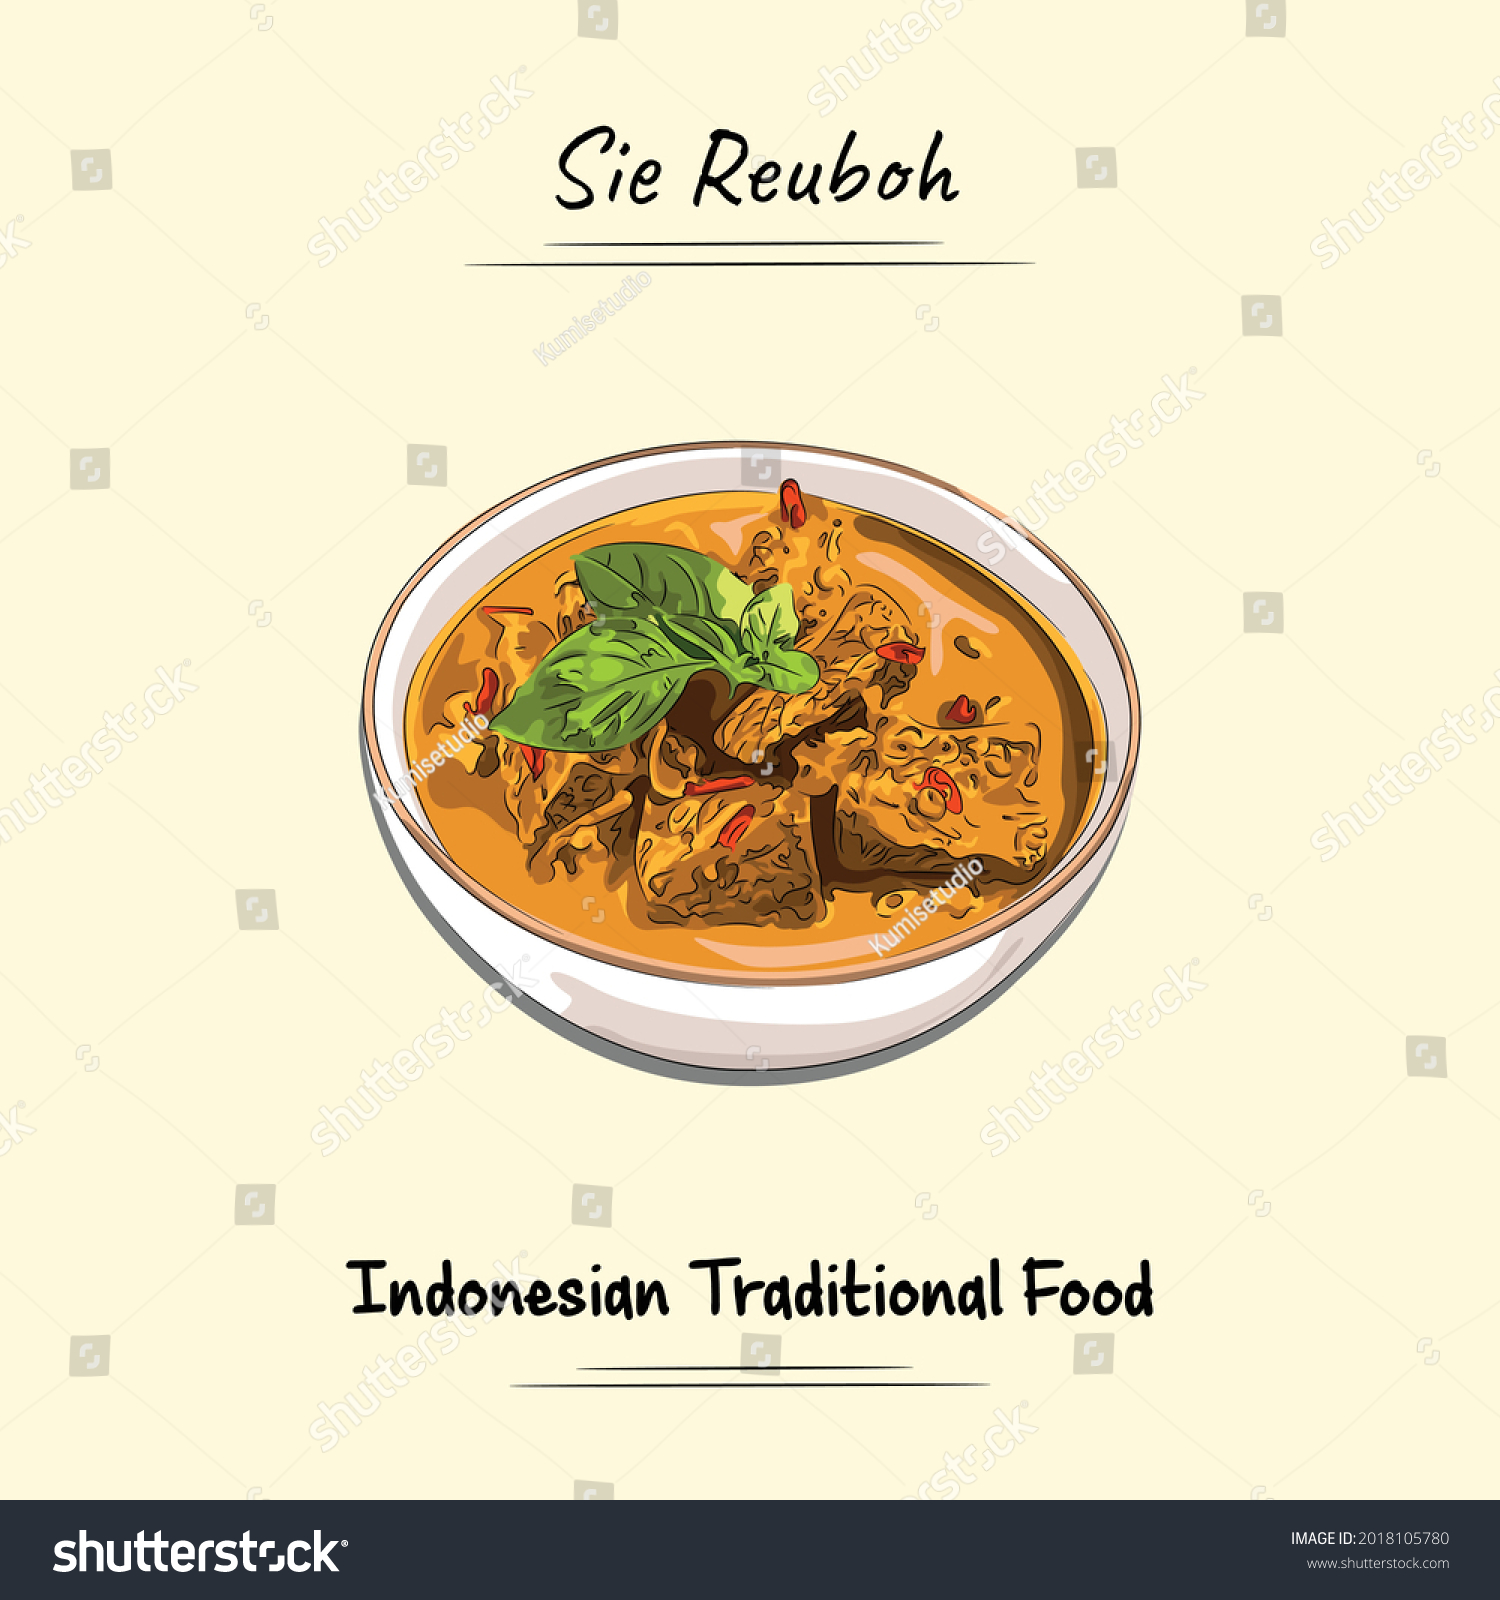 SVG of Sie Reuboh Illustration Sketch And Vector Style, Traditional Food From Aceh, Good to use for restaurant menu, Indonesian food recipe book, and food content. svg